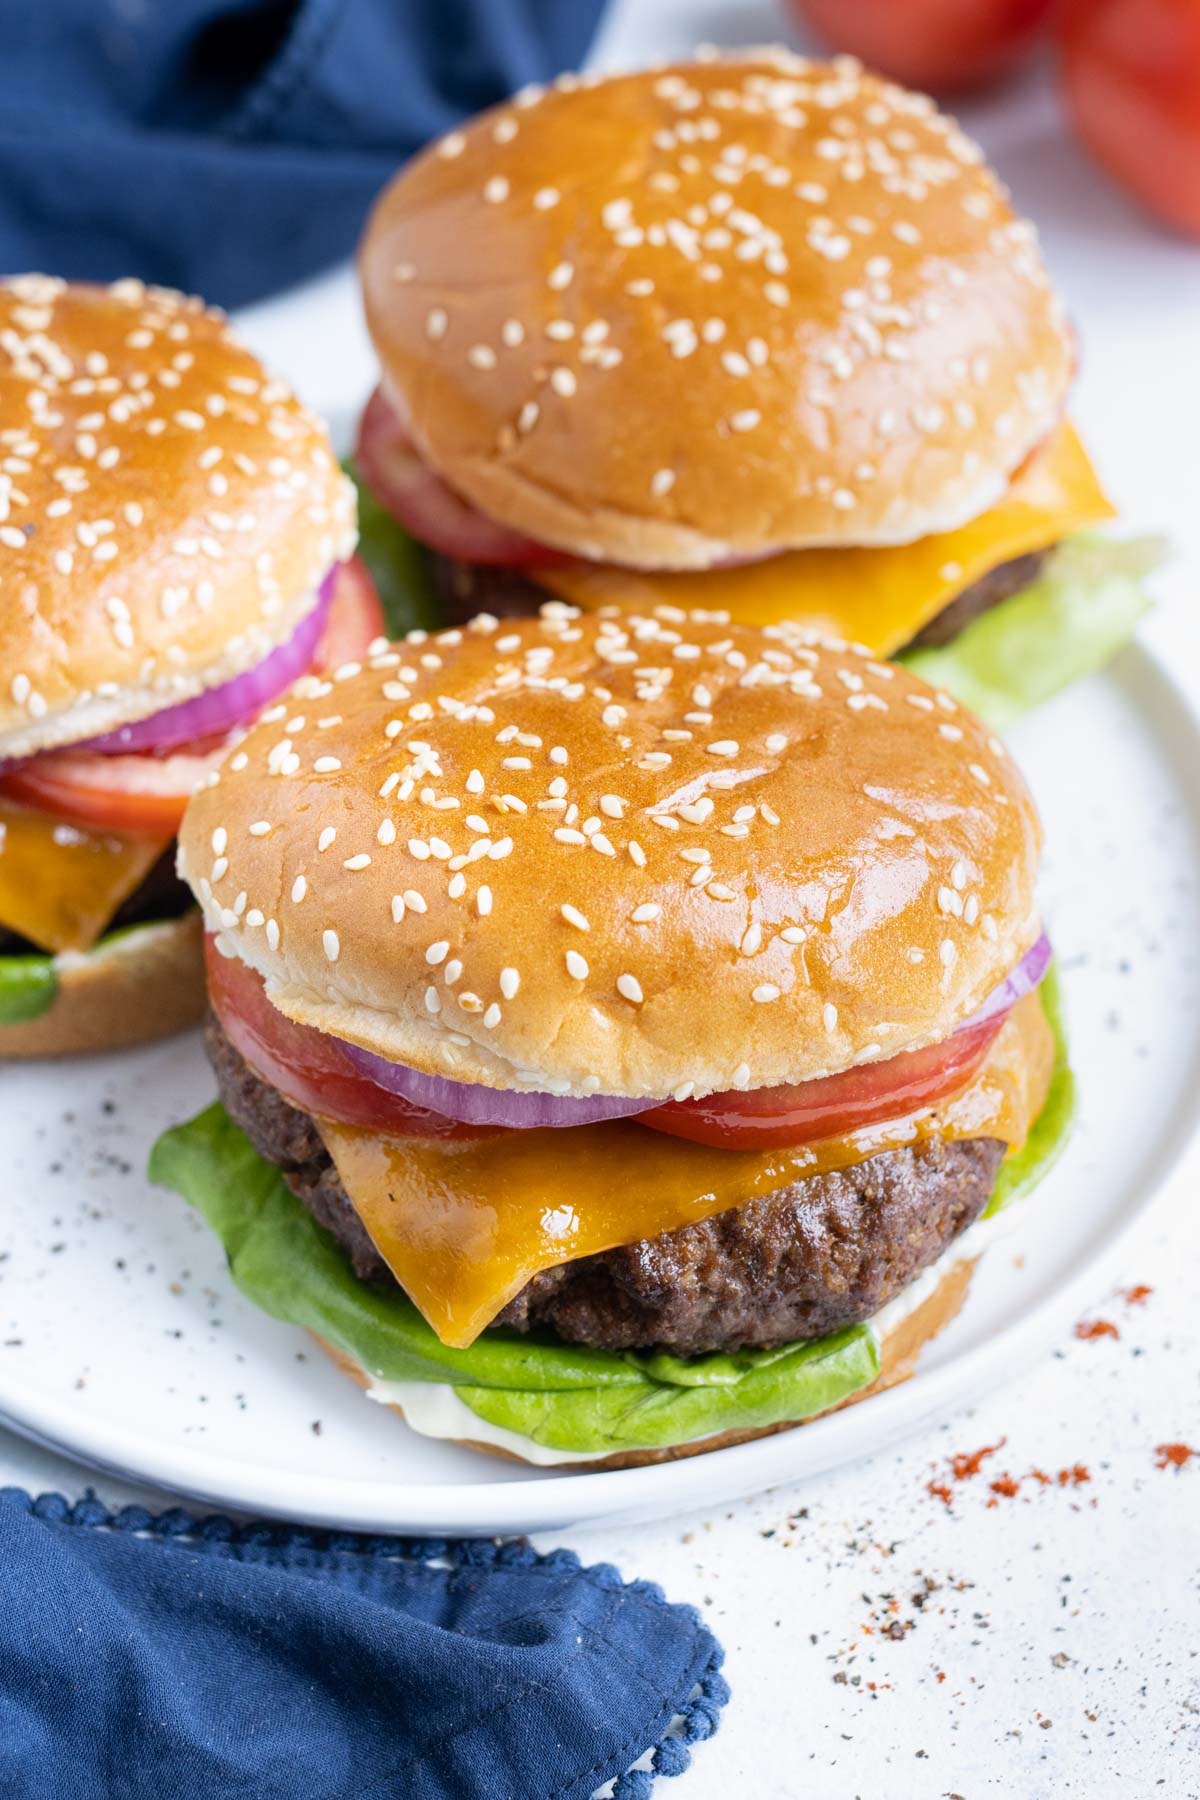 Three hamburgers are shown on a plate on the counter.